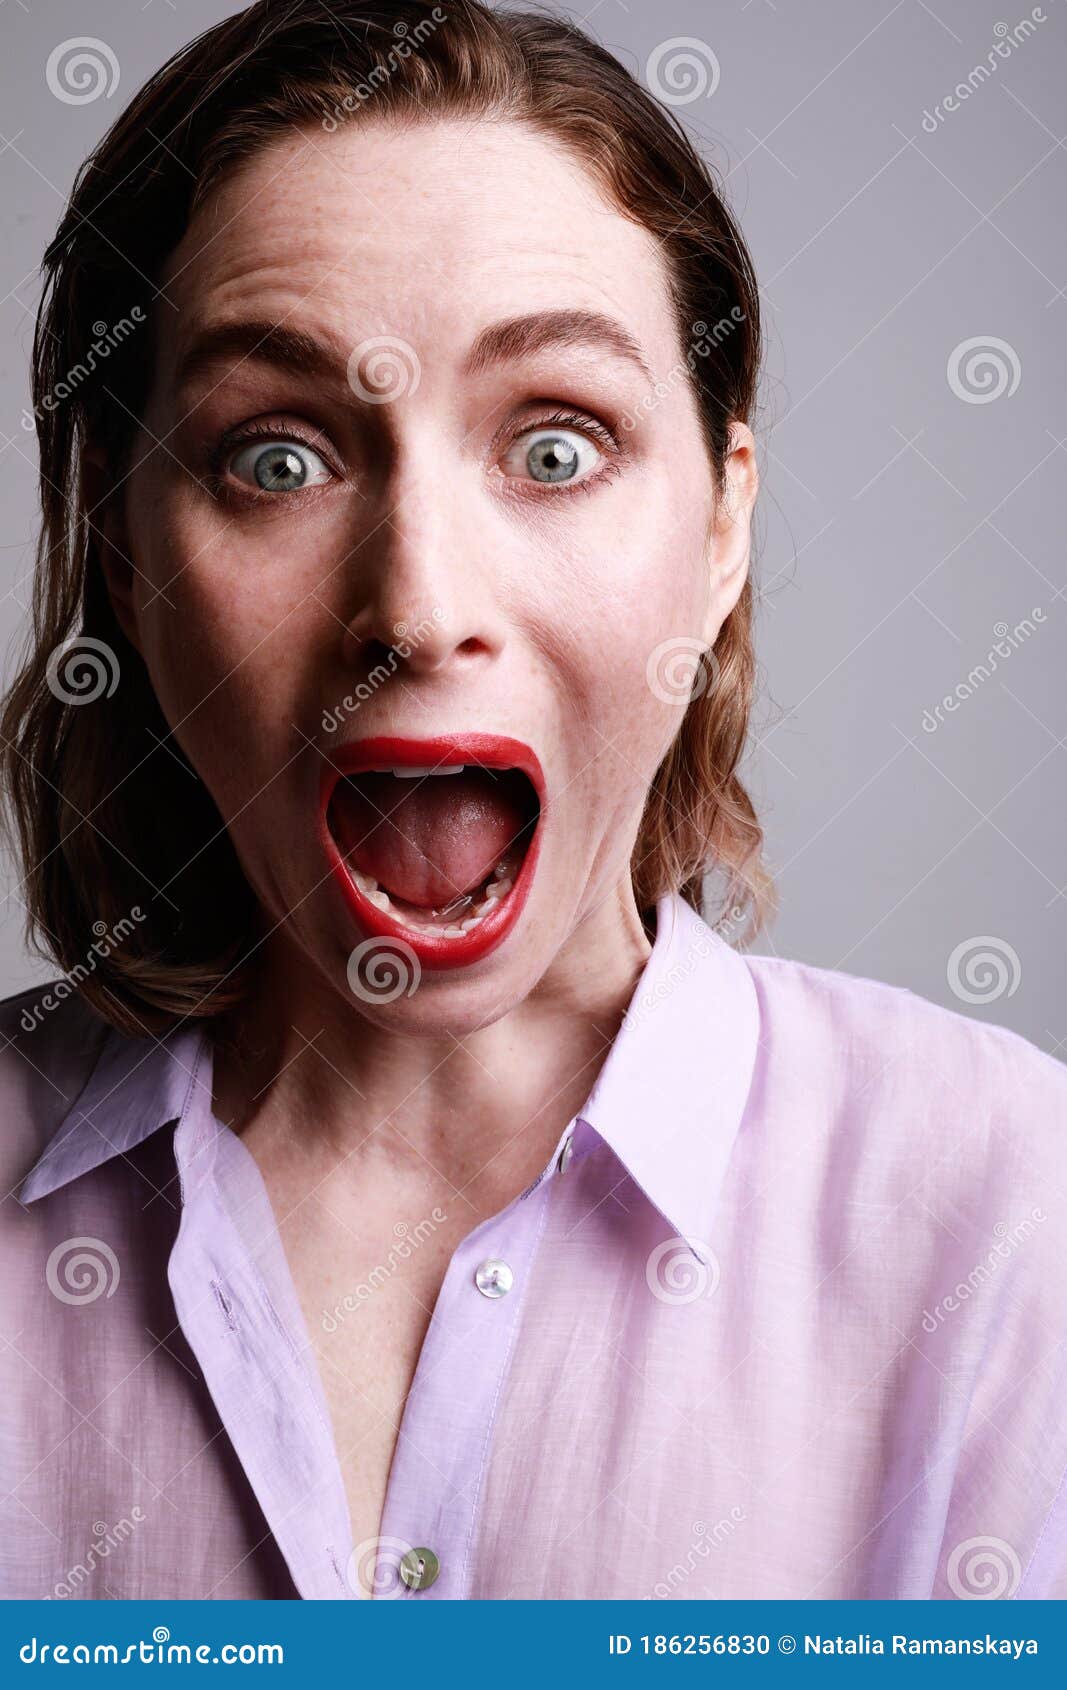 Portrait Woman Looking Shoked Wide Open Mouth Isolated Grey Wall Background Emotion Facial